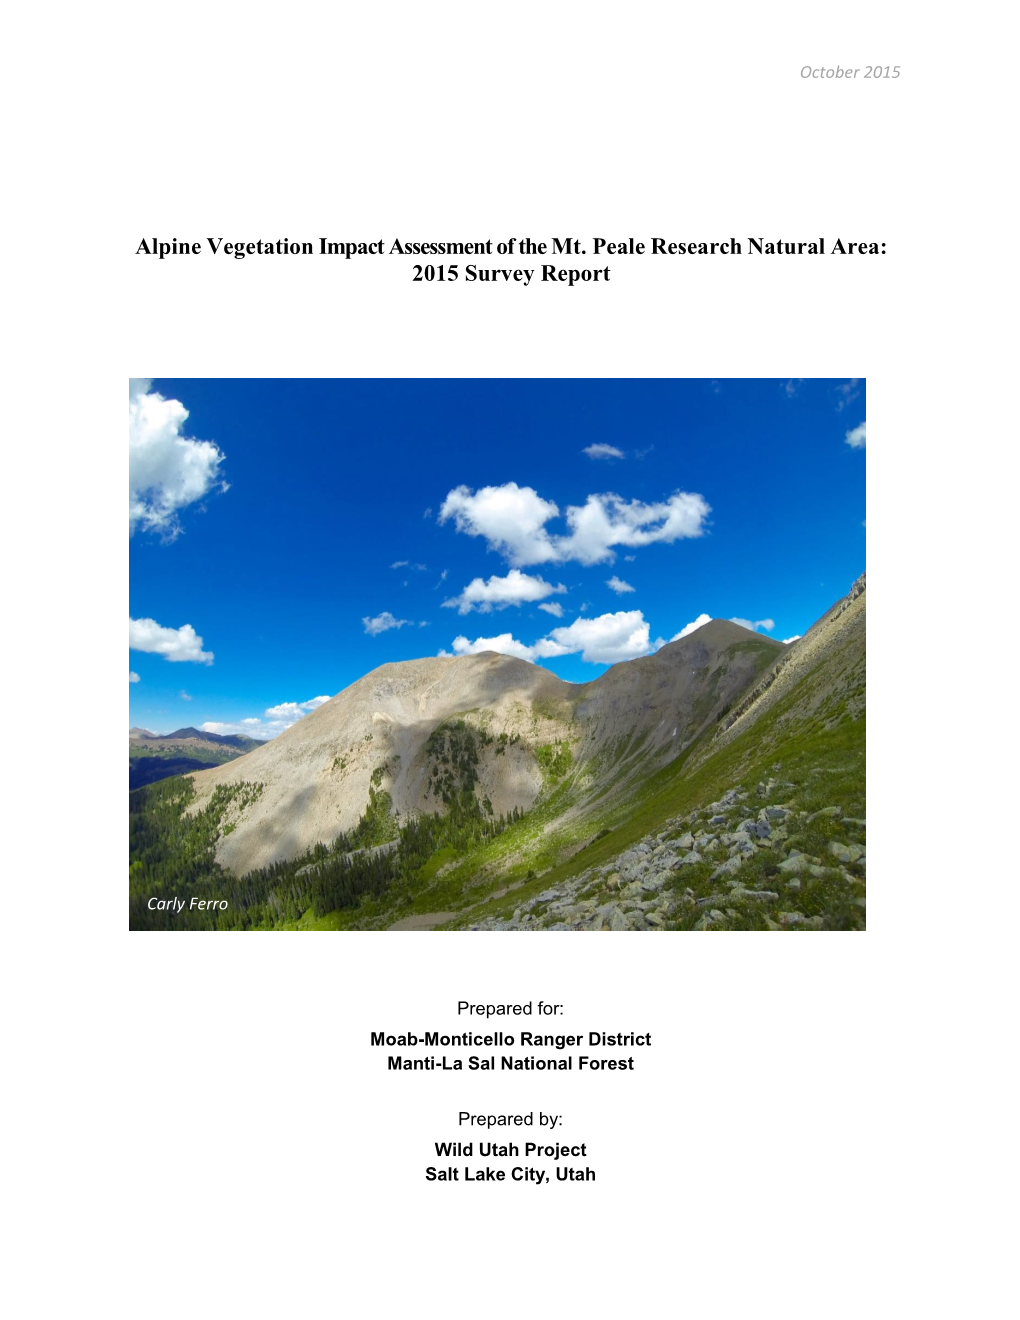 Alpine Vegetation Impact Assessment of the Mt. Peale Research Natural Area: 2015 Survey Report